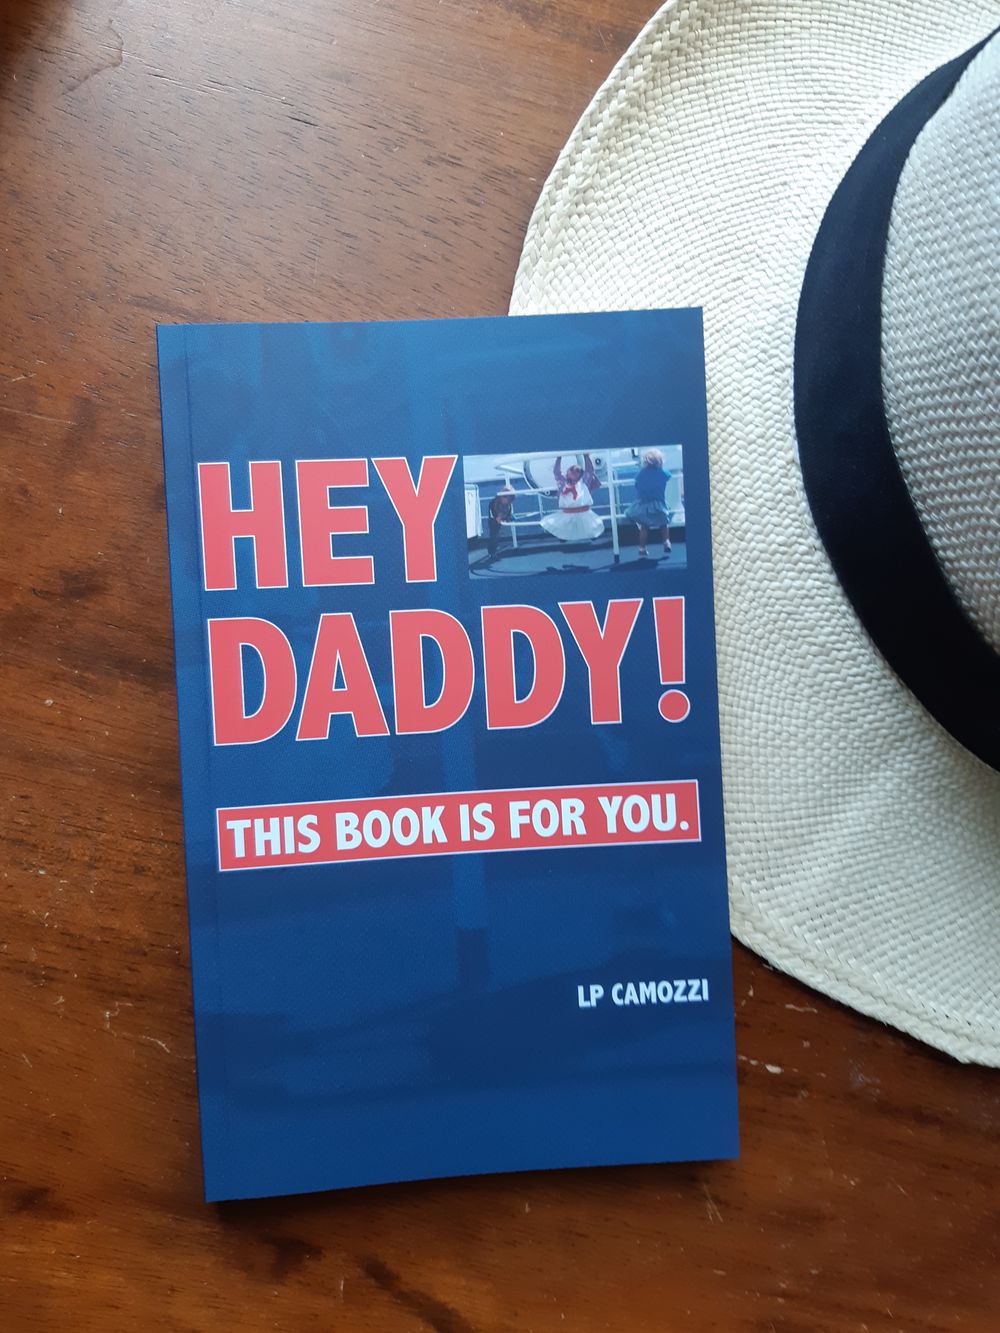 A humorous memoir and pragmatic guide for fathers wanting to raise successful kids